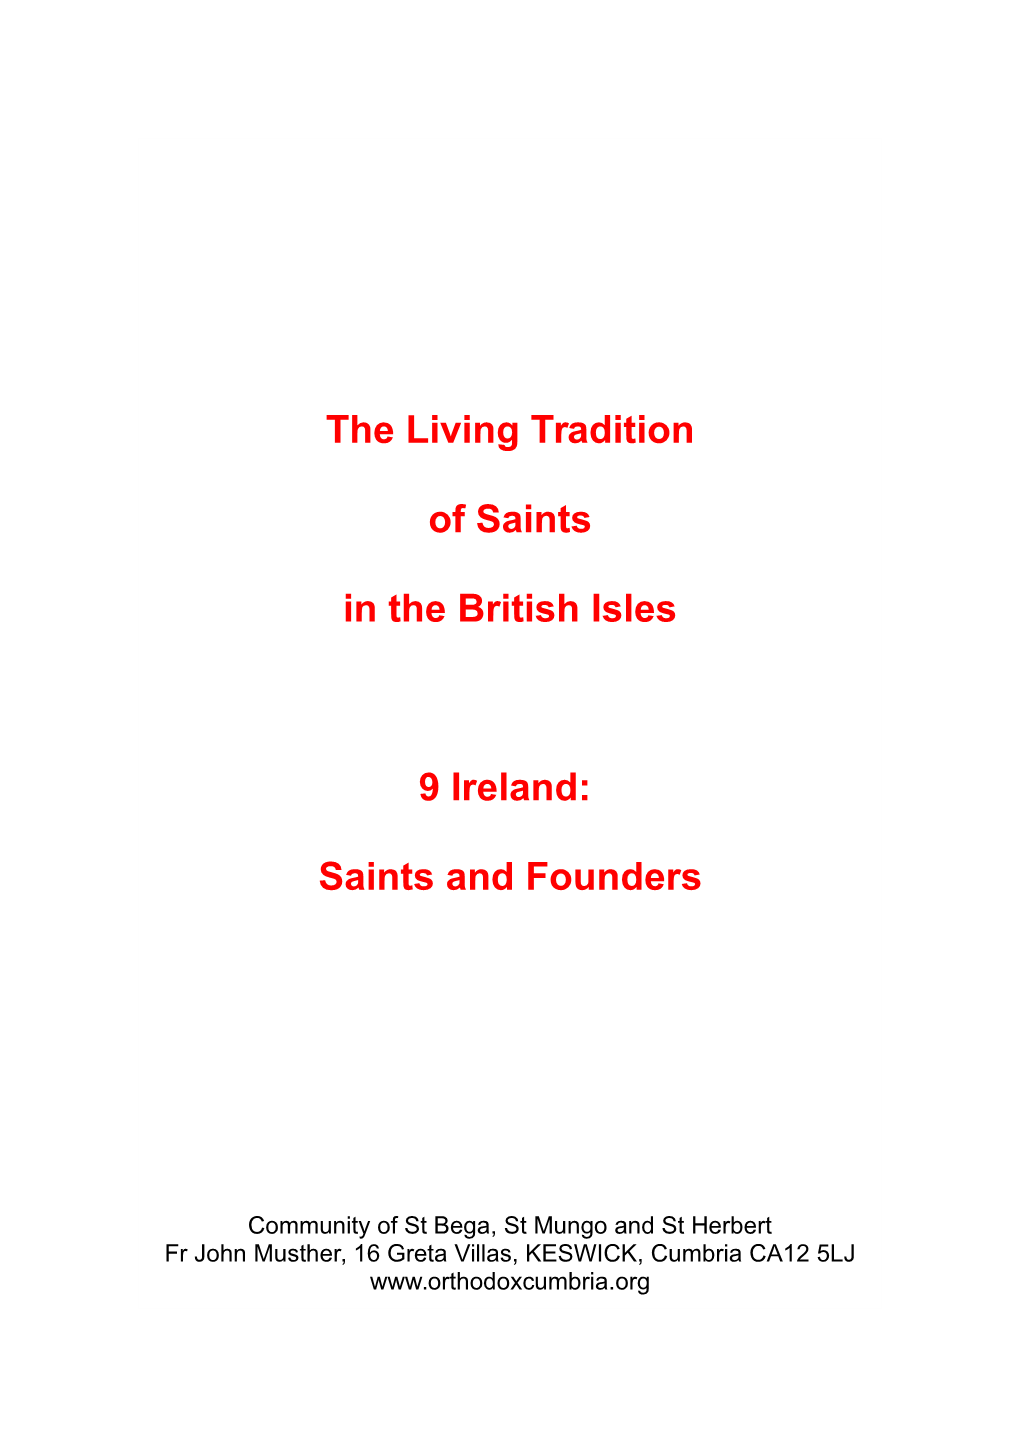 The Living Tradition of Saints in the British Isles 9 Ireland